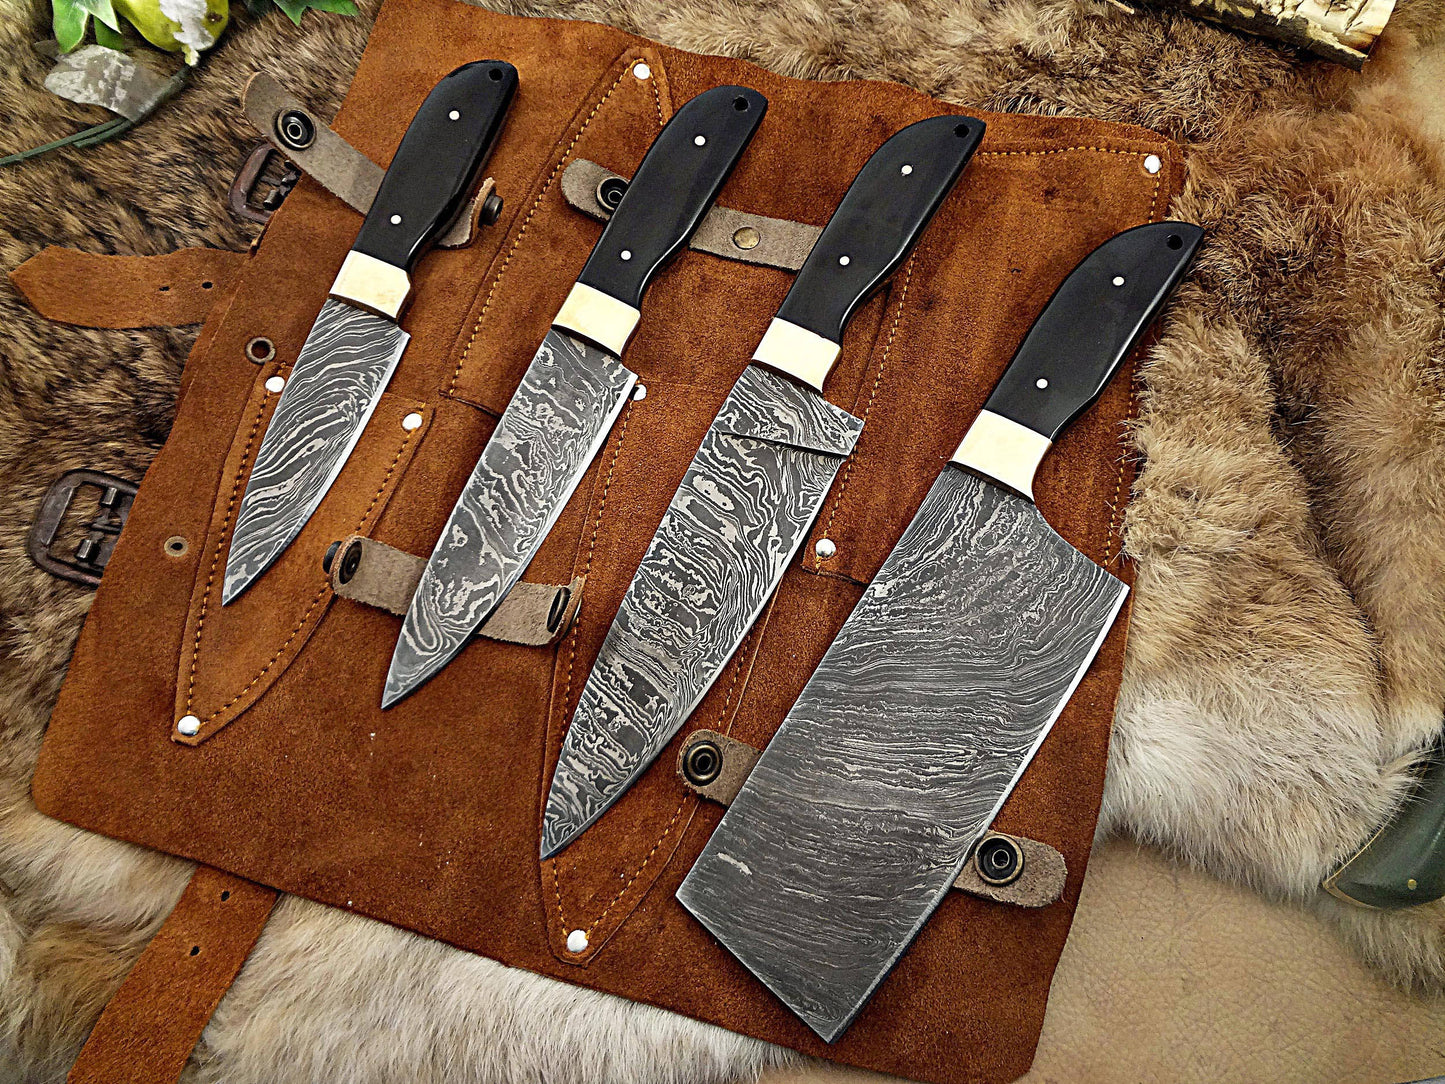 4 pieces chef knives set, Slicer, fillet, cleaver overall 37 inches full tang hand forged Damascus steel blade, custom made leather sheath